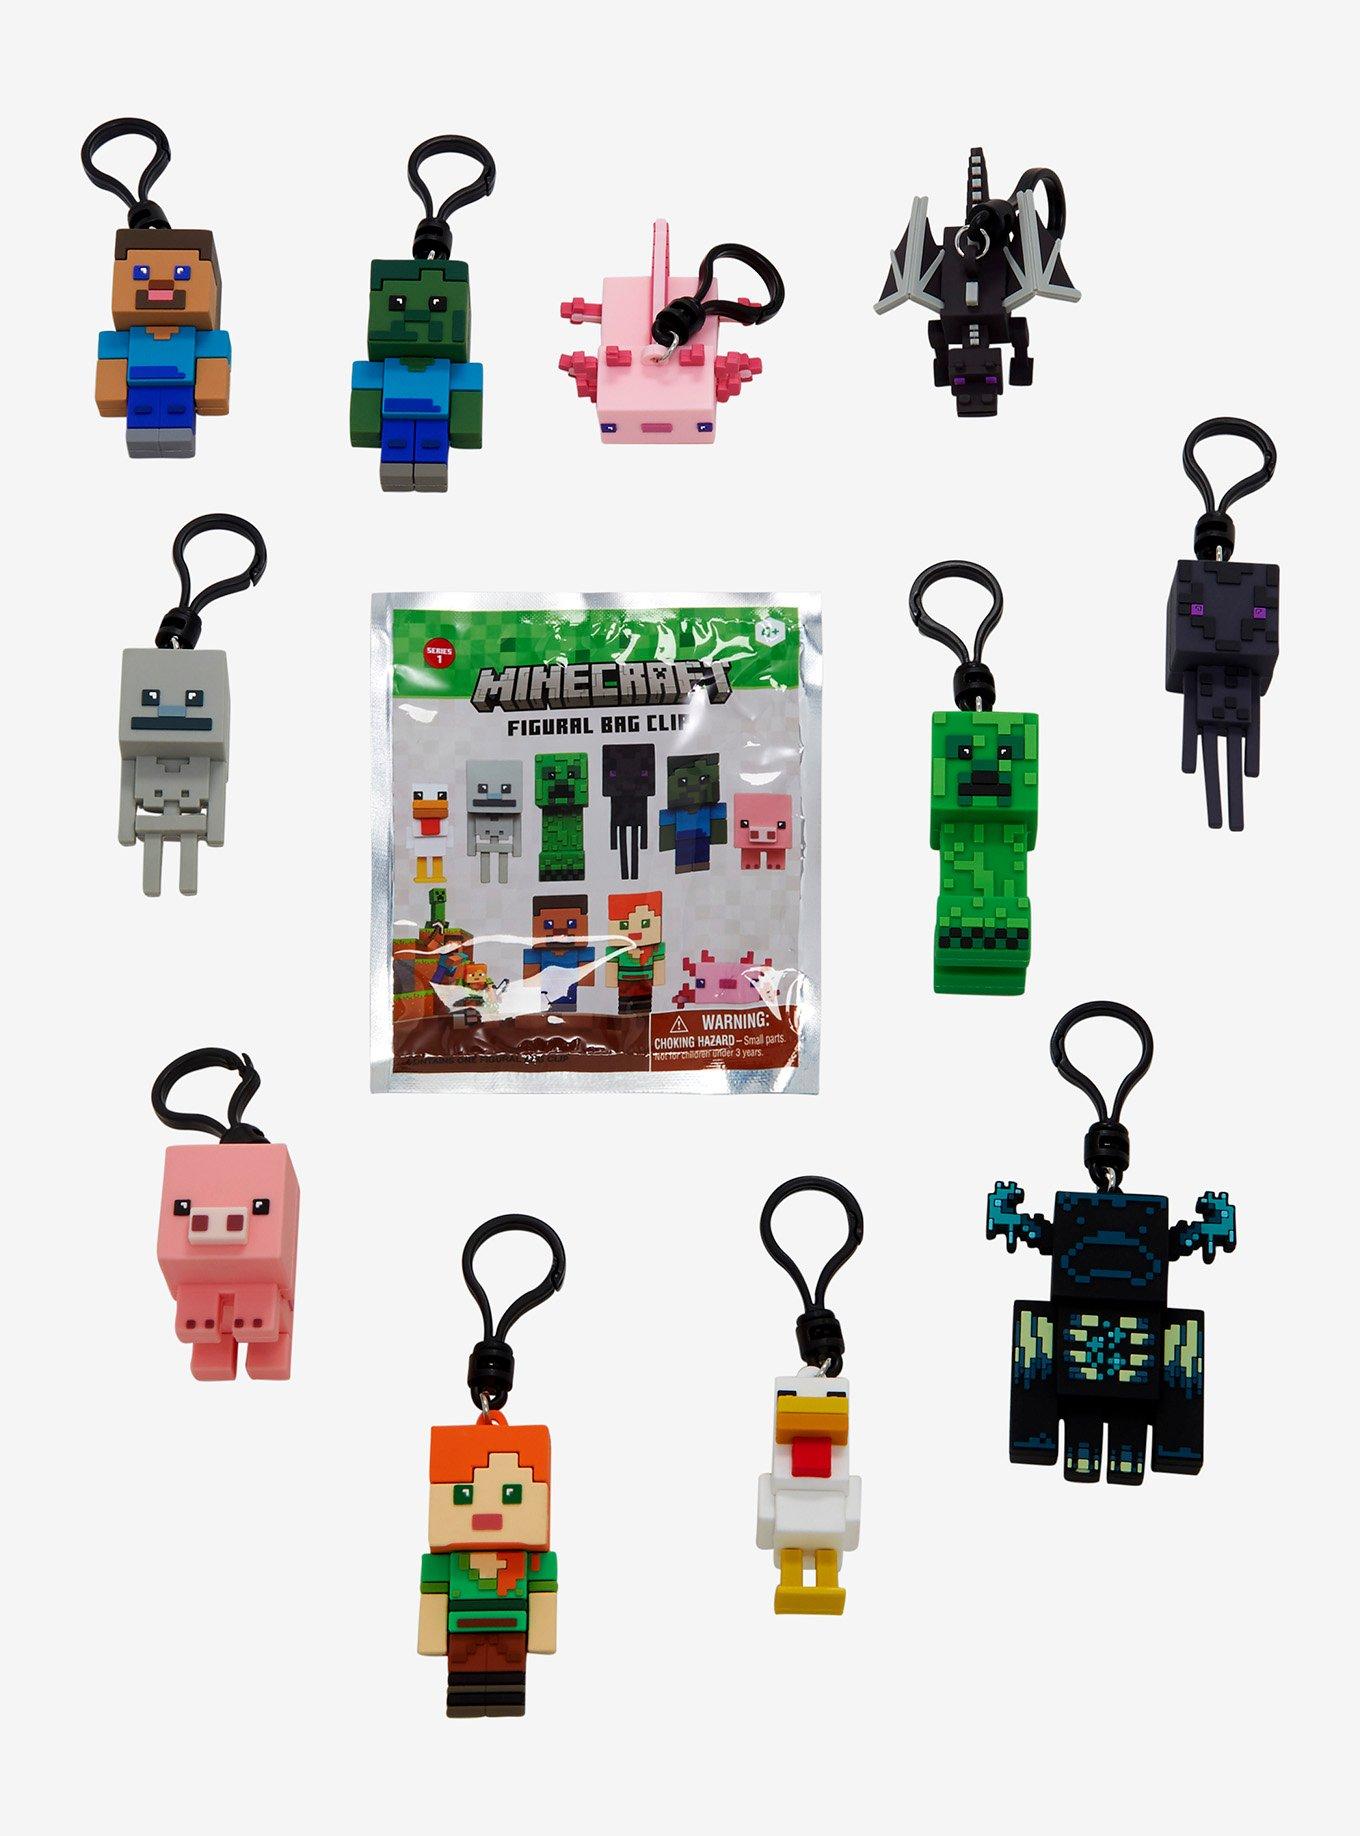 Minecraft Character Blind Bag Figural Key Chain